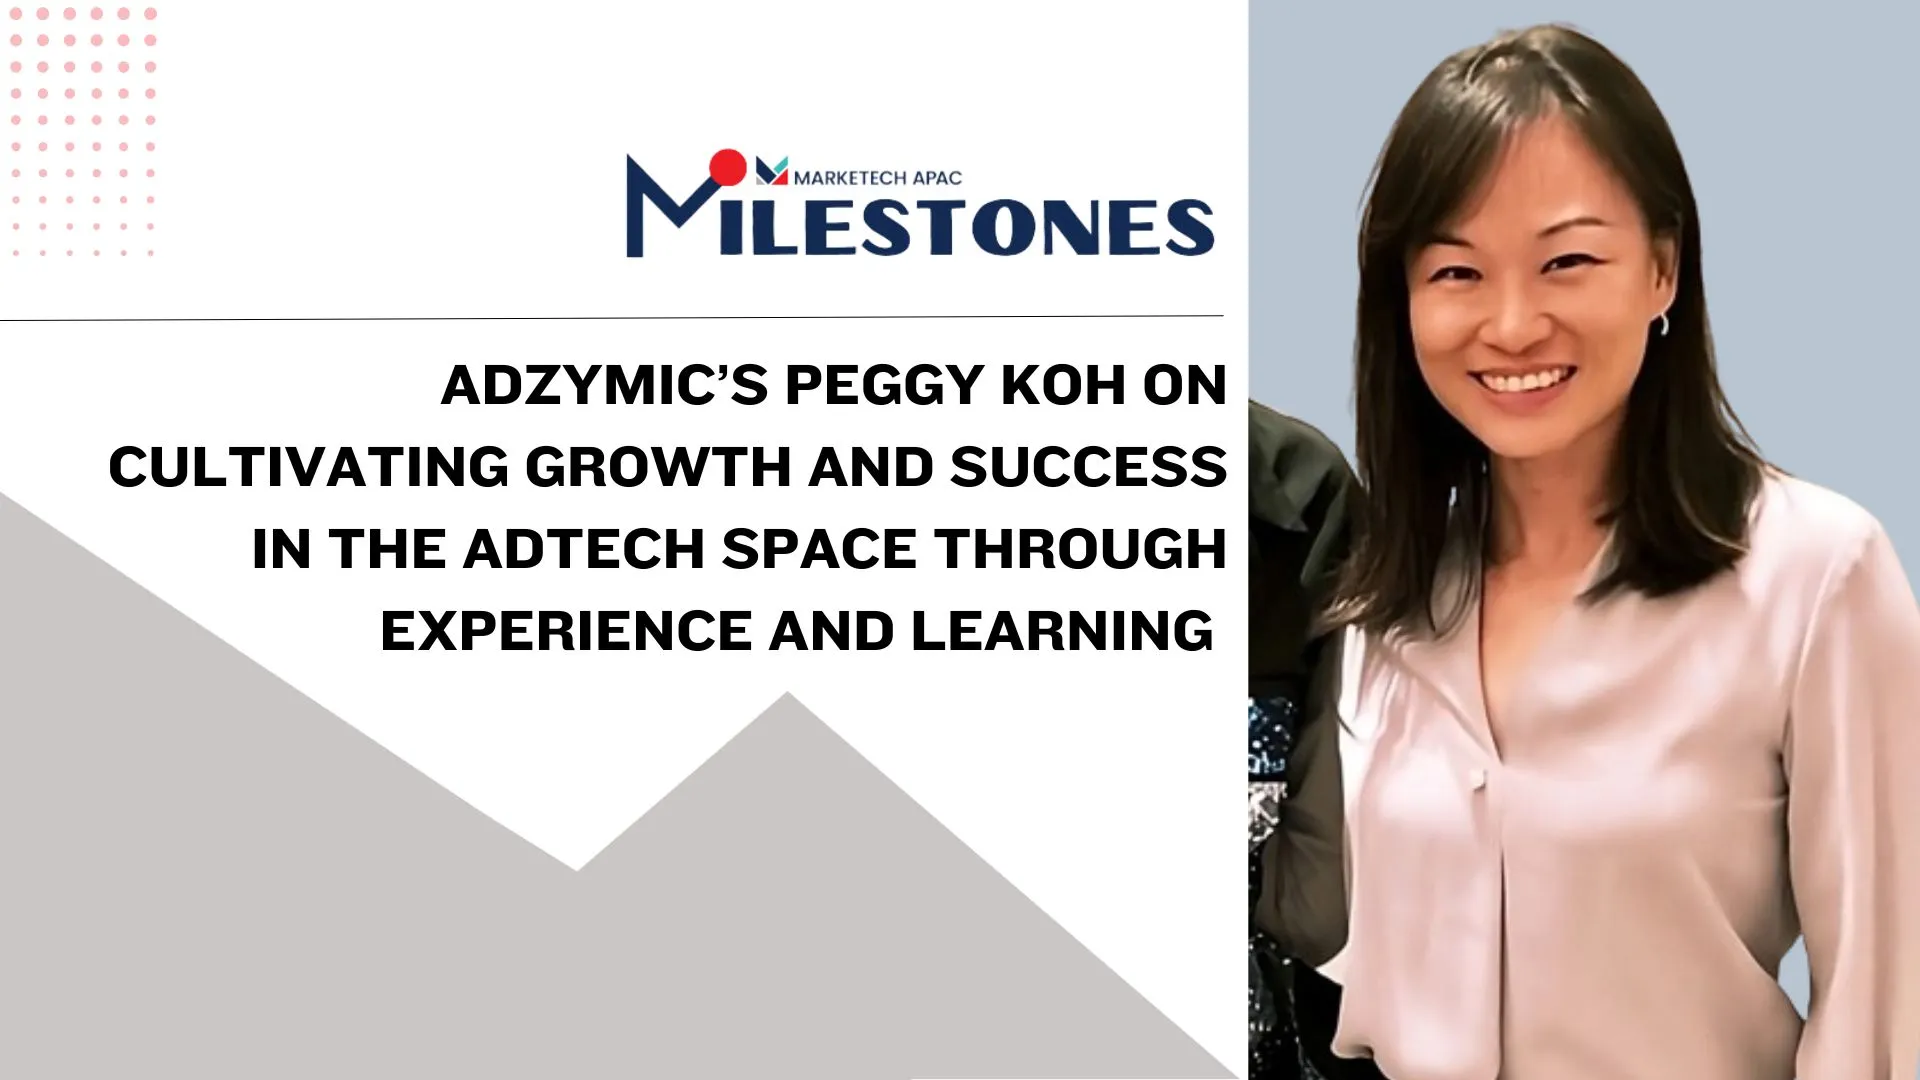 Milestones: Adzymic’s Peggy Koh on cultivating growth and success in the adtech space through experience and learning